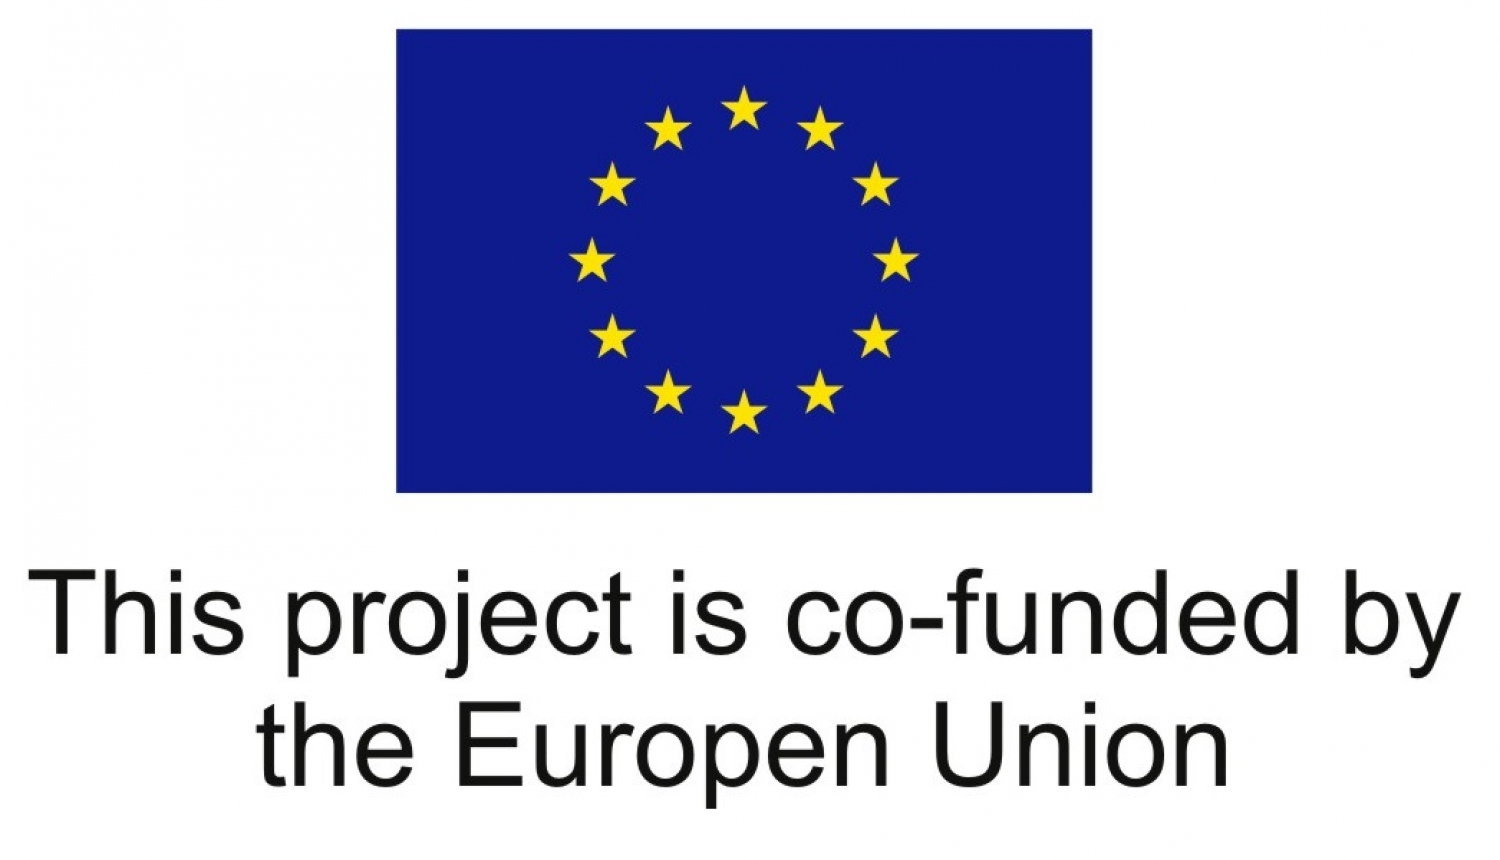 This project is co-funded by the Europen Union